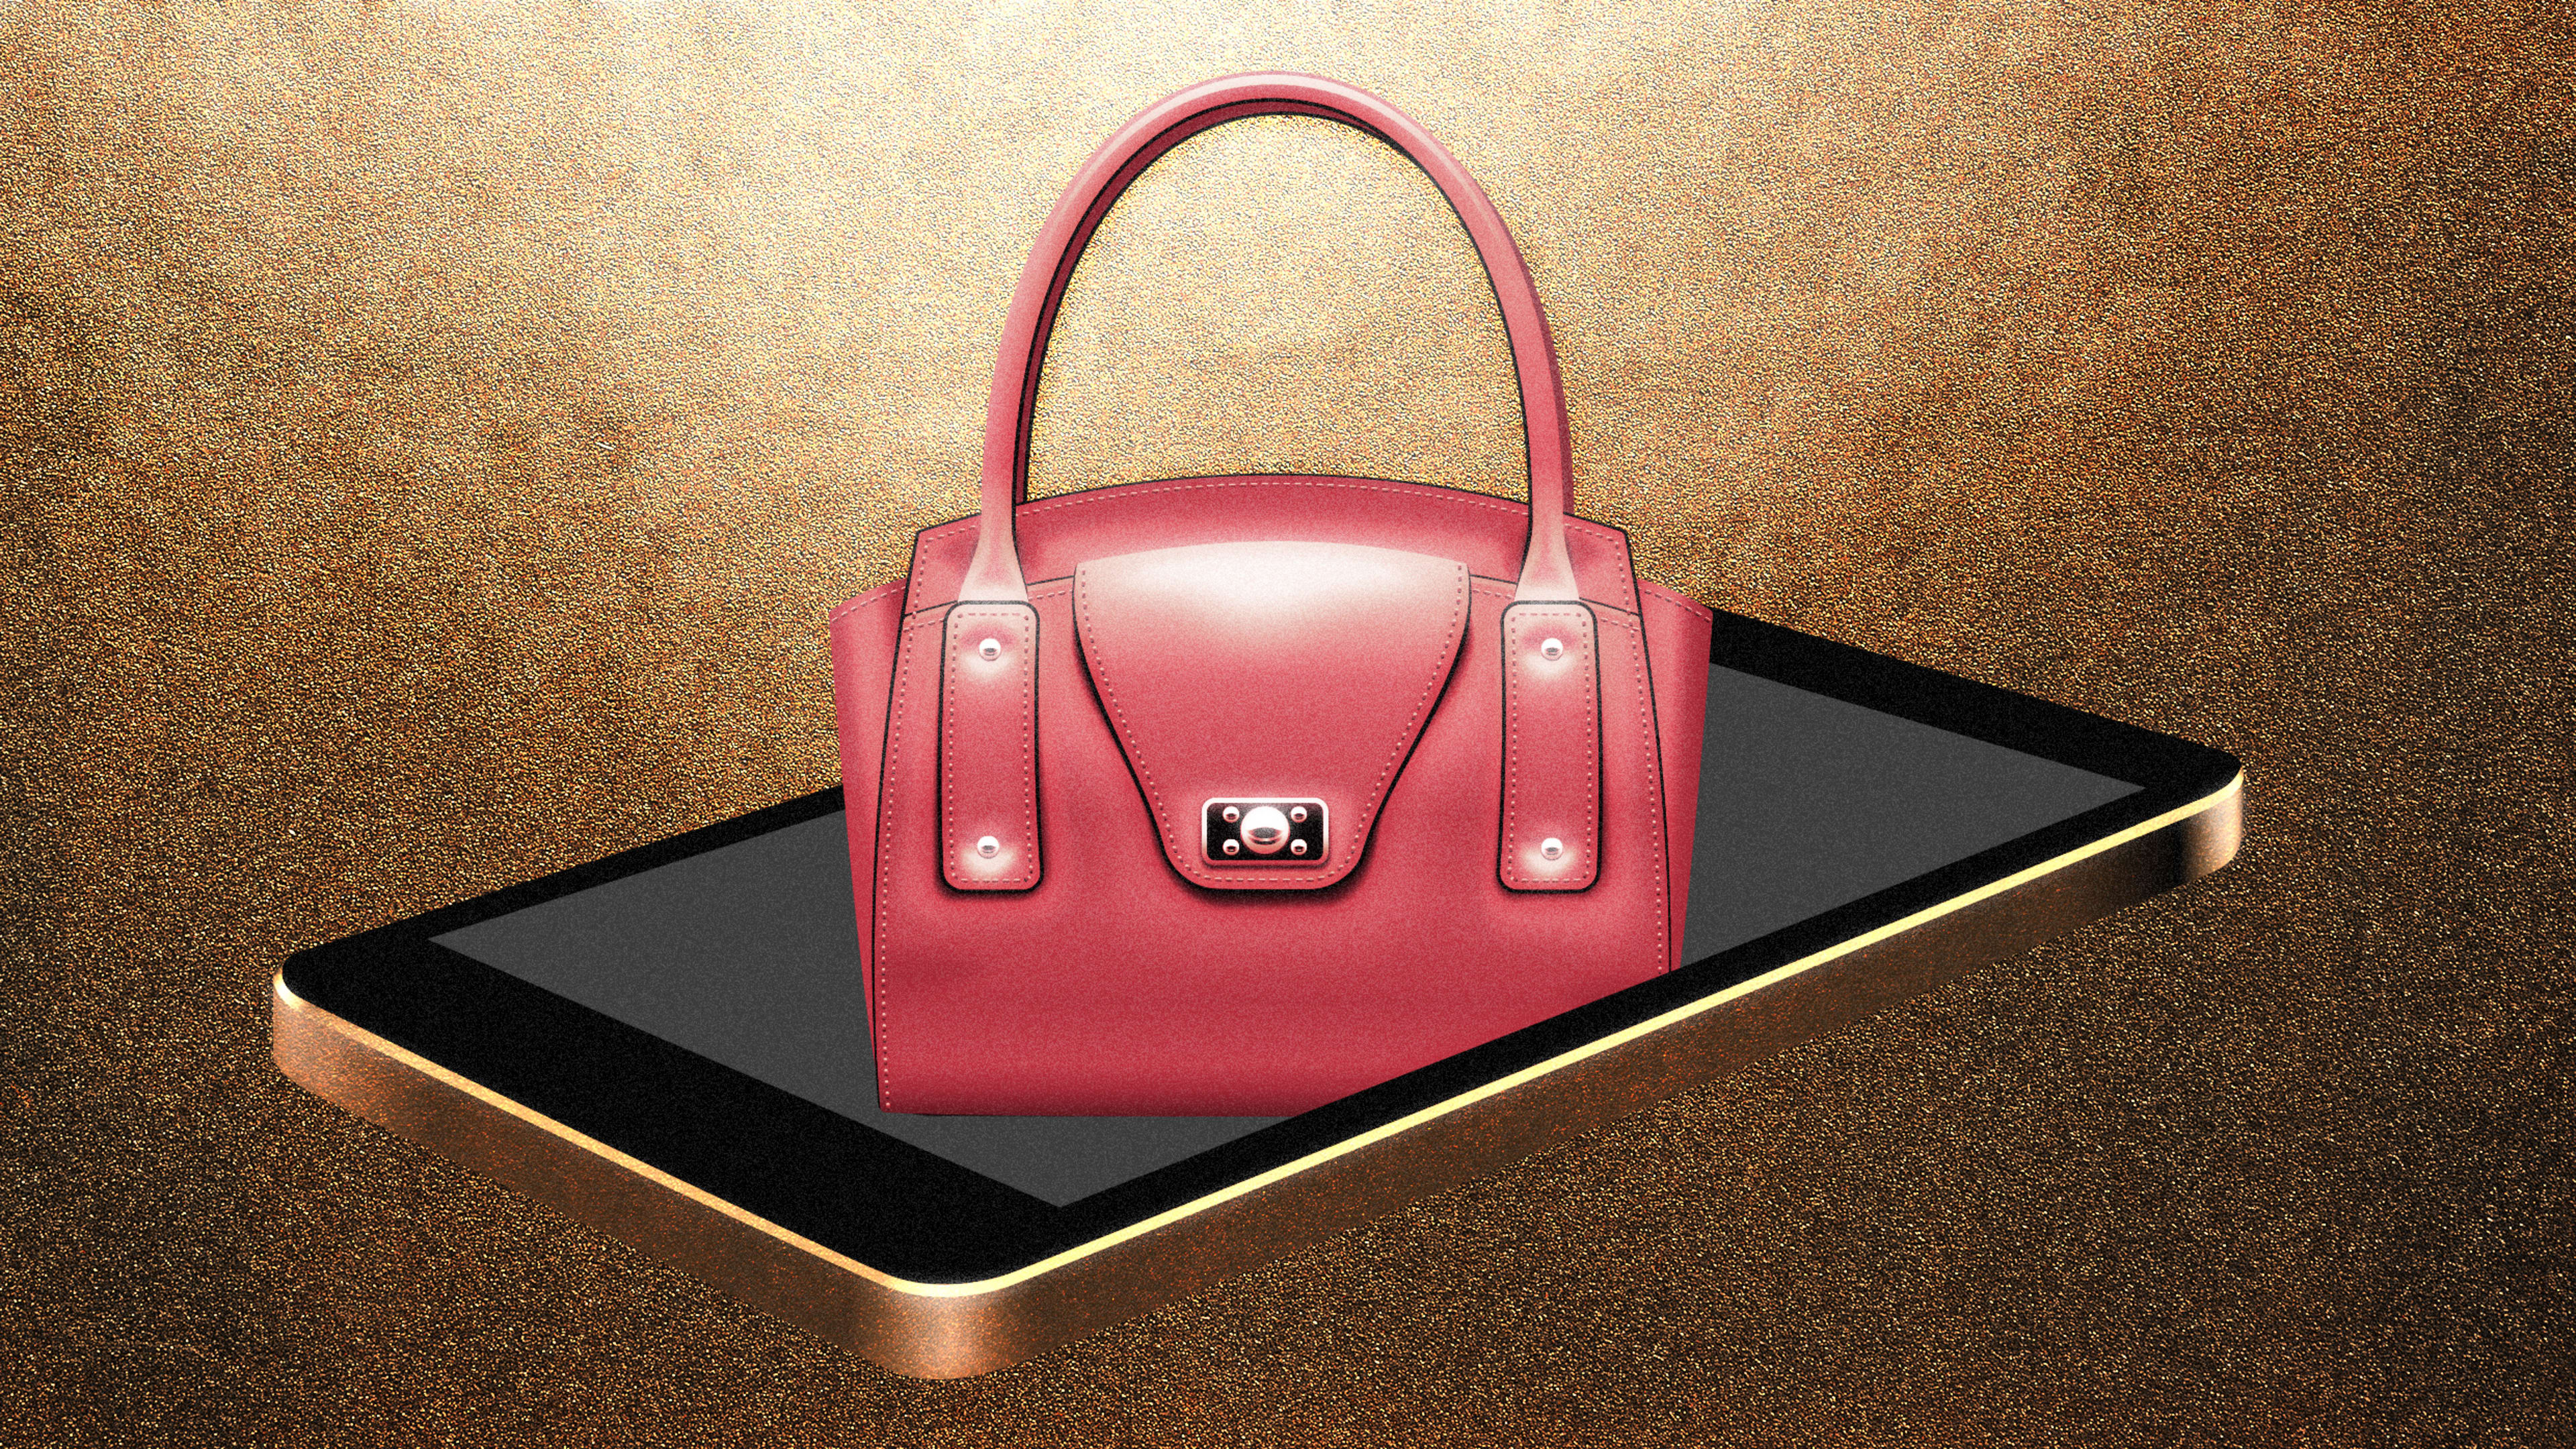 How much could you get for that Prada bag? This tool calculates its exact value